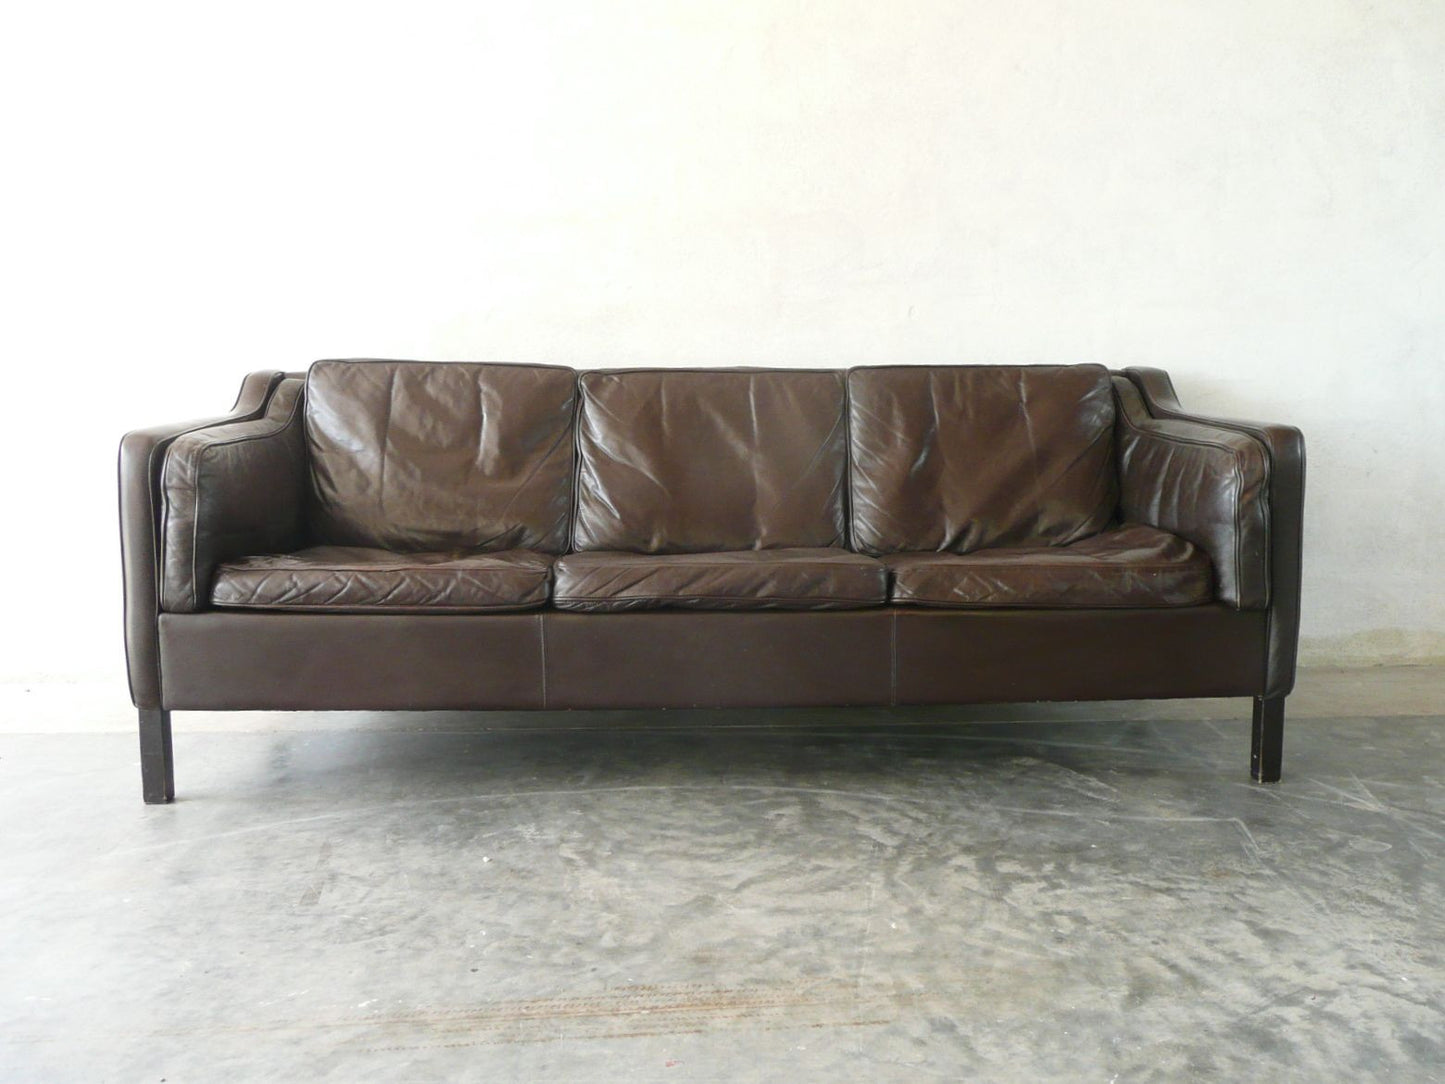 Three seat leather sofa in style of Mogensen